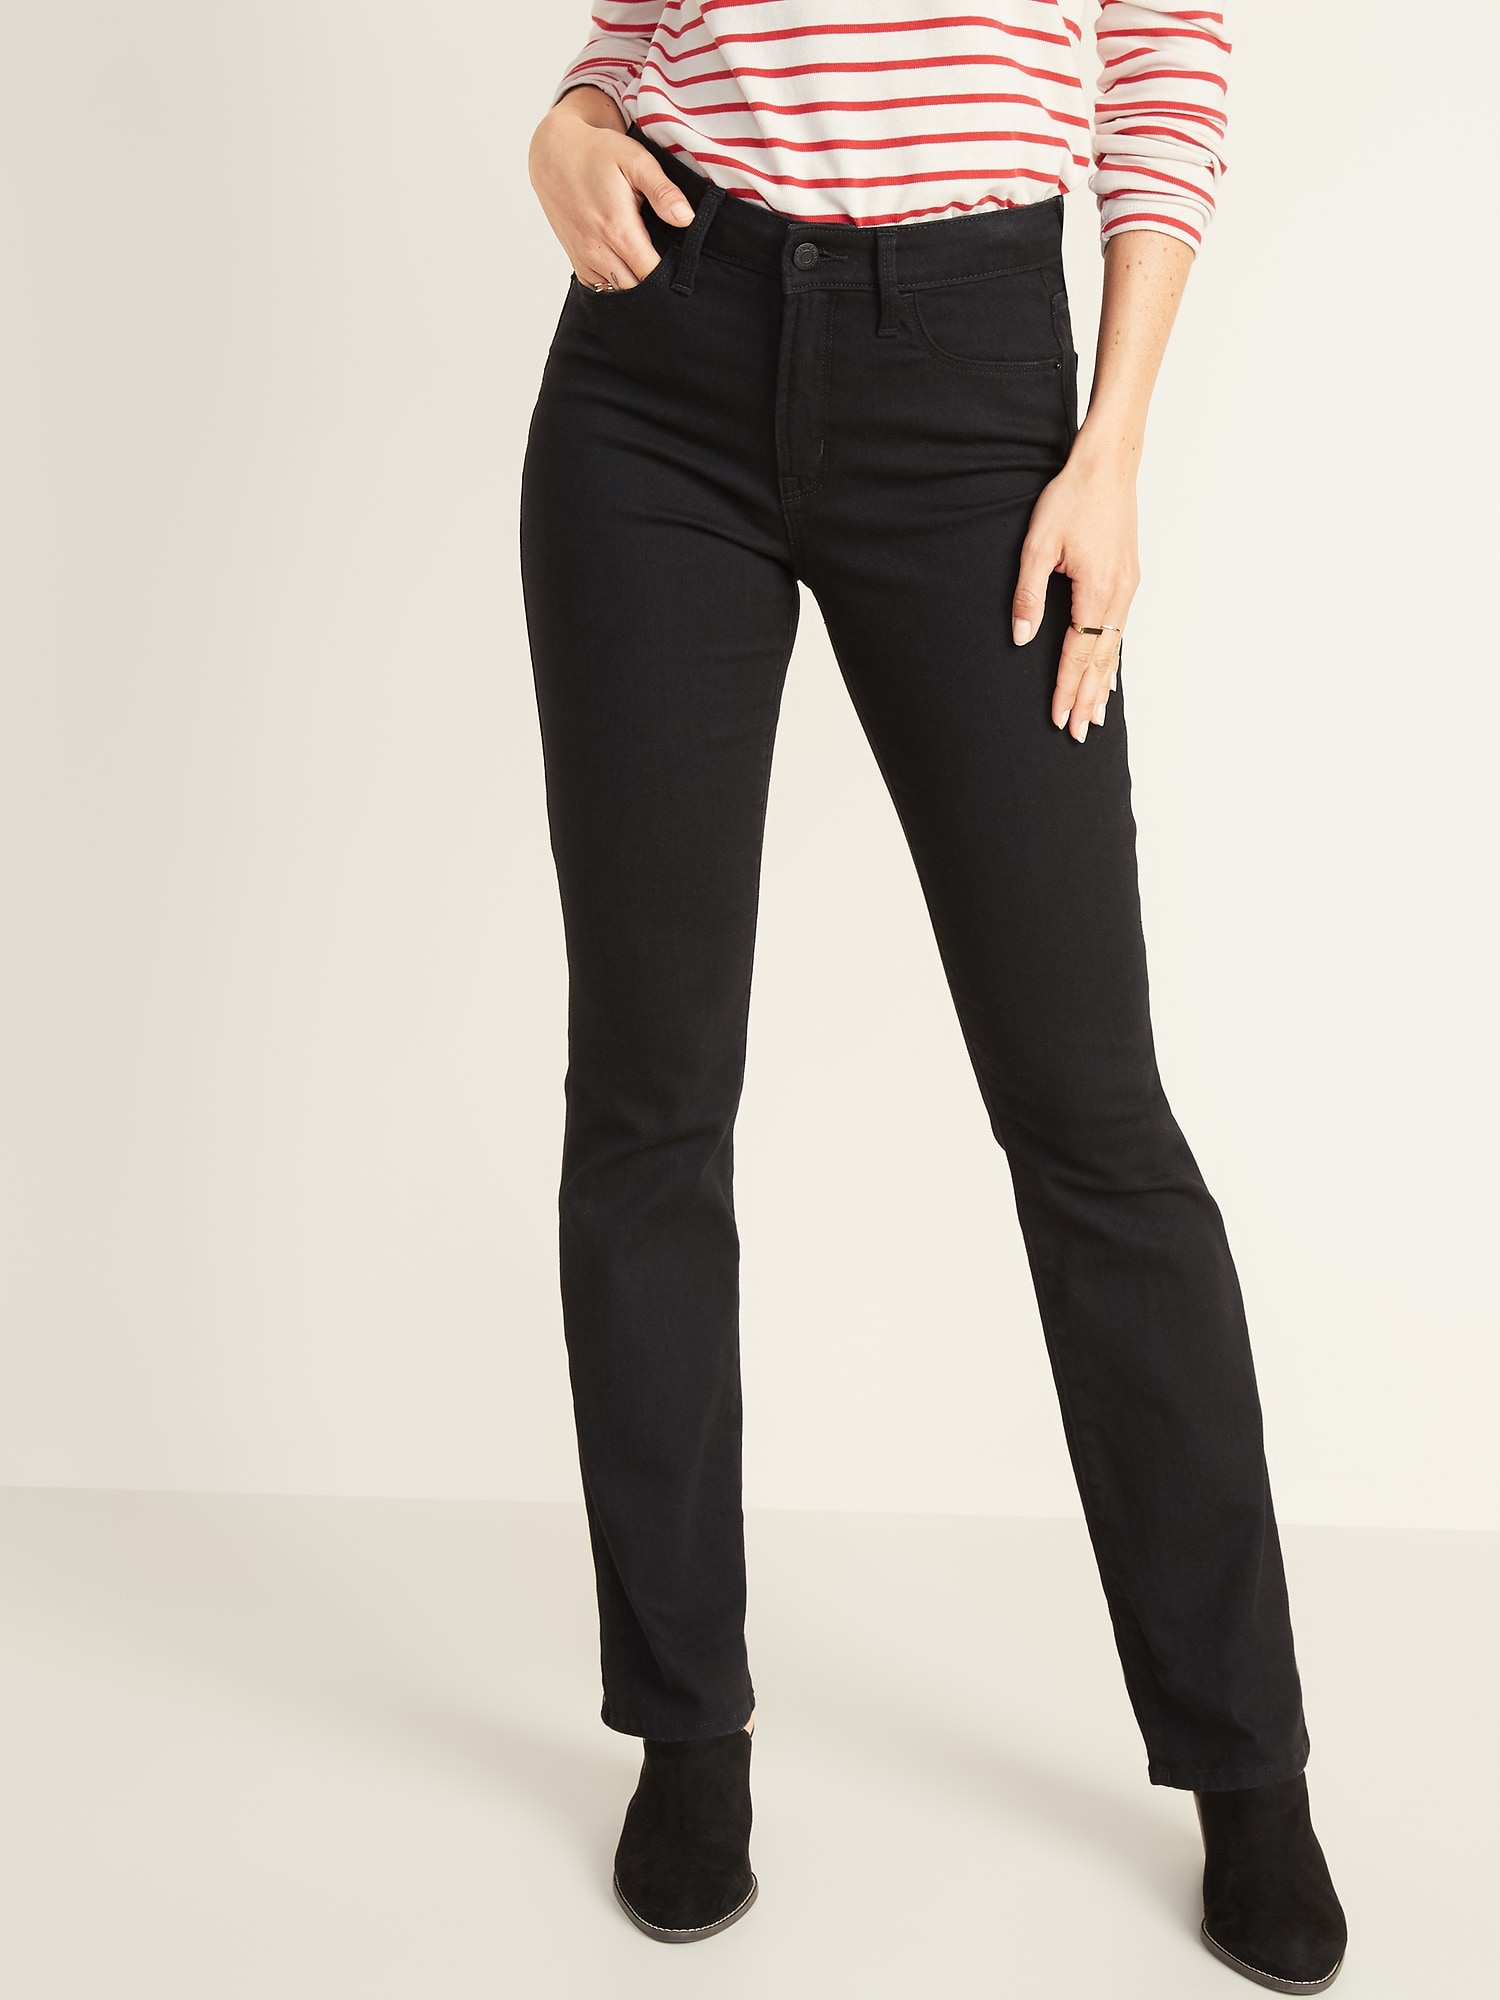 ladies high waisted bootcut jeans